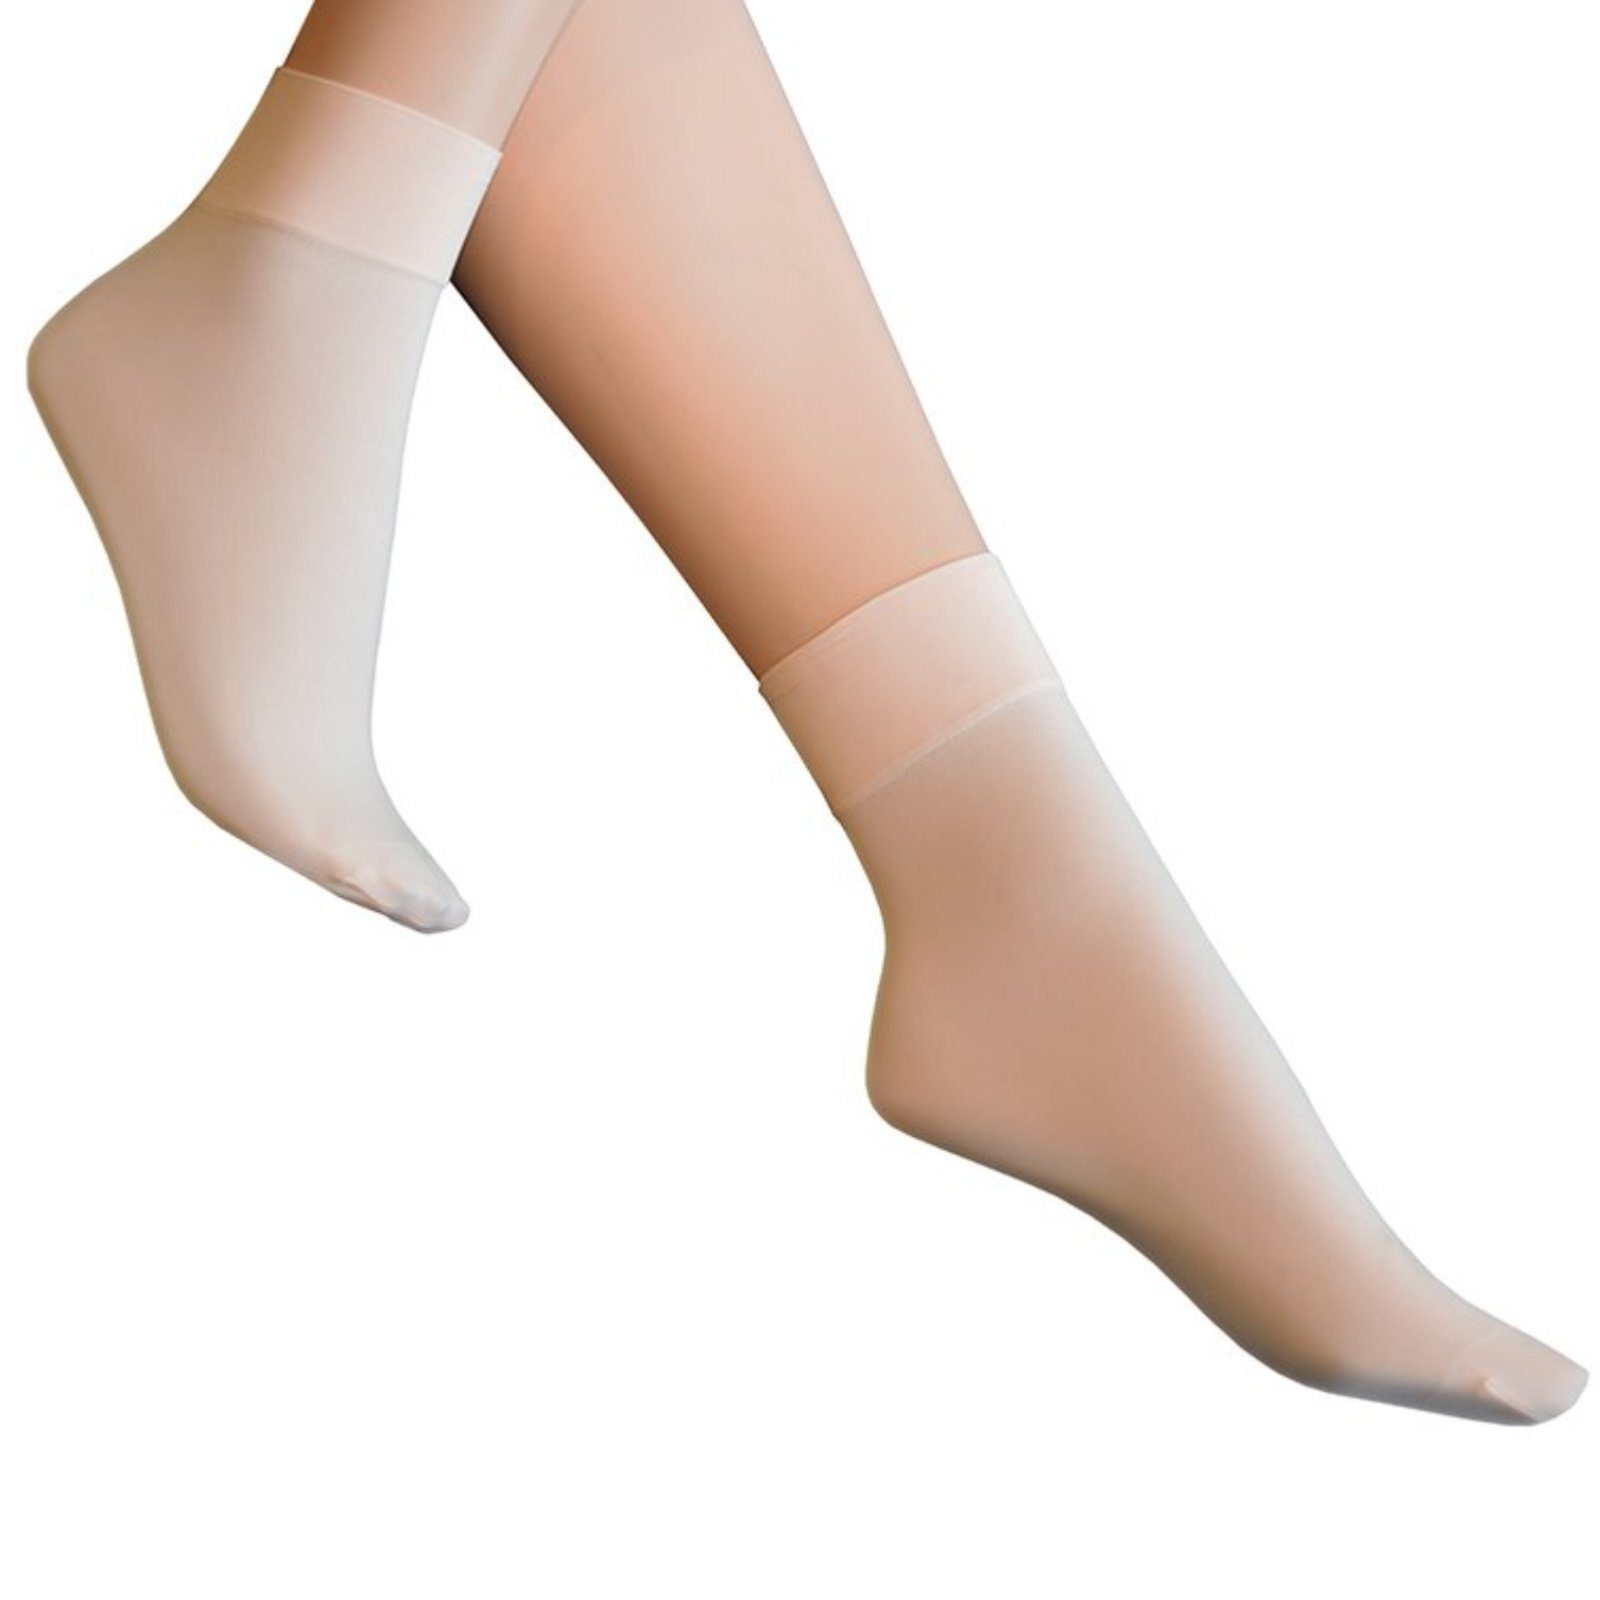  Newcotte 15 Paris Dance Socks for Women Nude Dance Socks Non  Slip Ankle Dance Socks Lightweight Non Slip Dance Socks Anti Skid Dance  Socks for Dancers Girls, Size 6-9 : Clothing